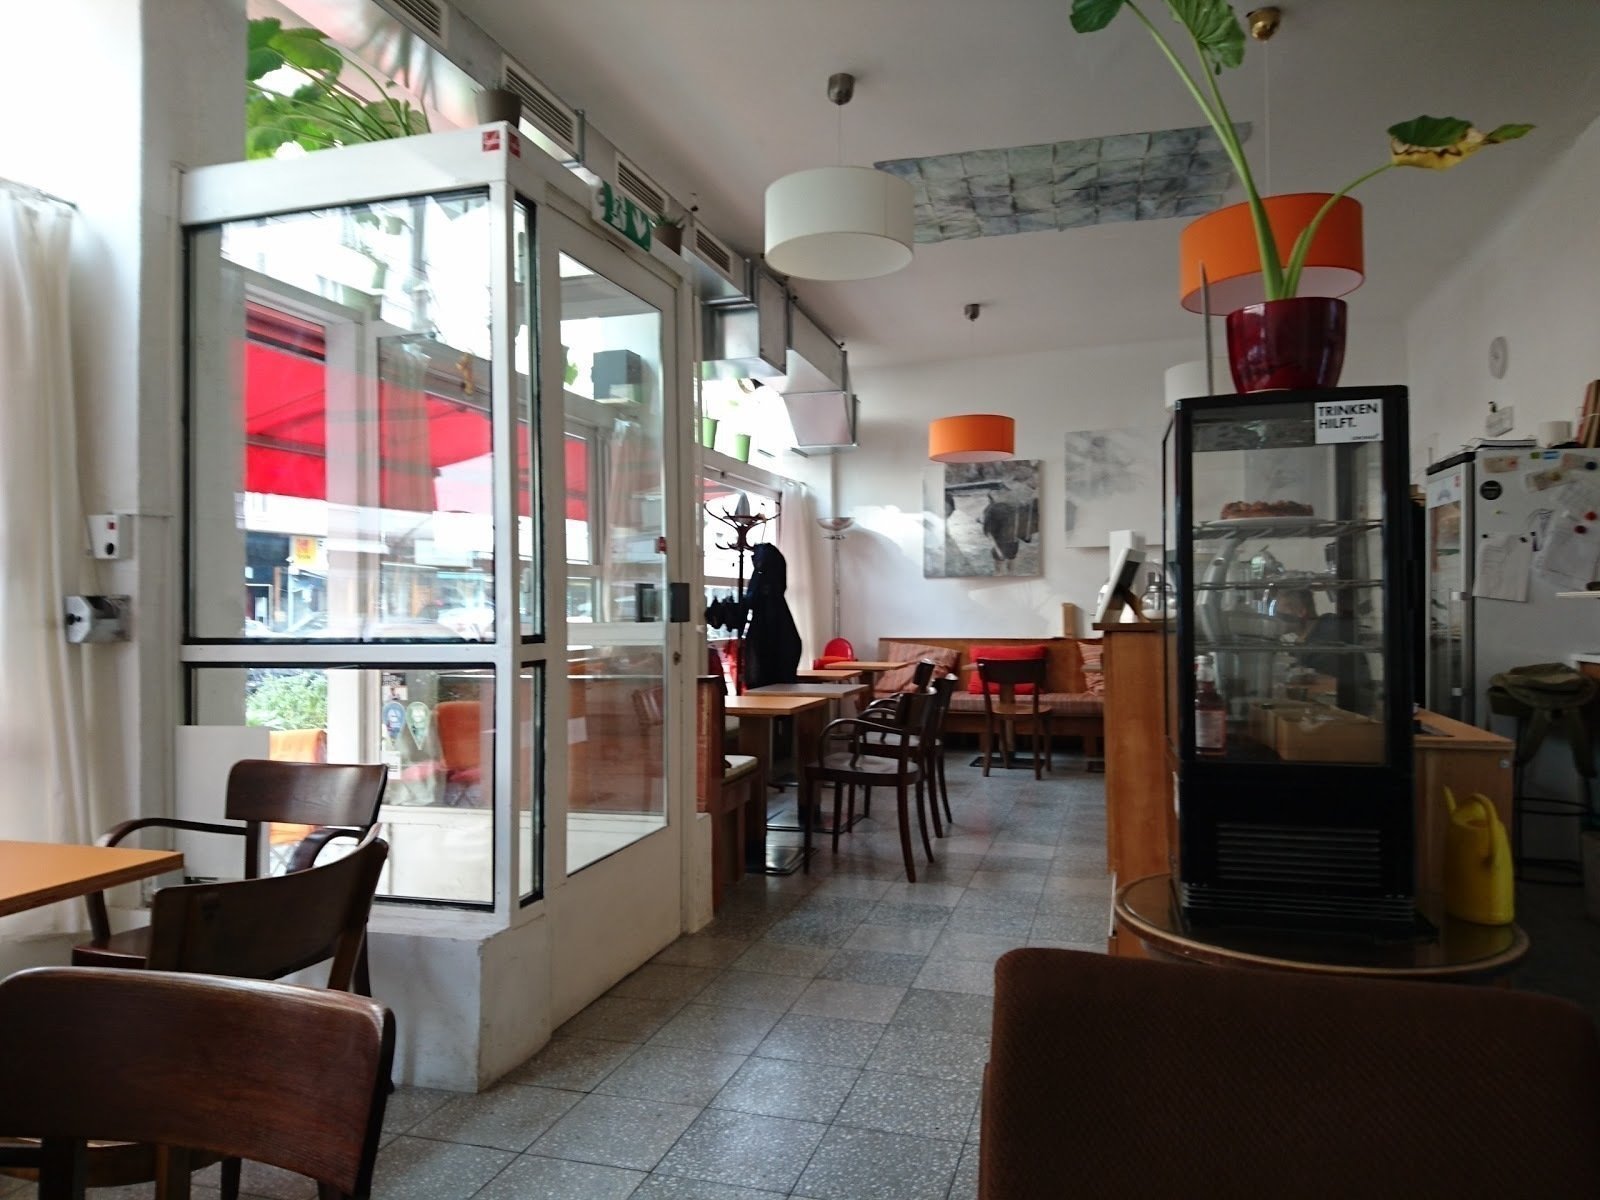 <span class="translation_missing" title="translation missing: en.meta.location_title, location_name: Cafe Nest, city: Vienna">Location Title</span>